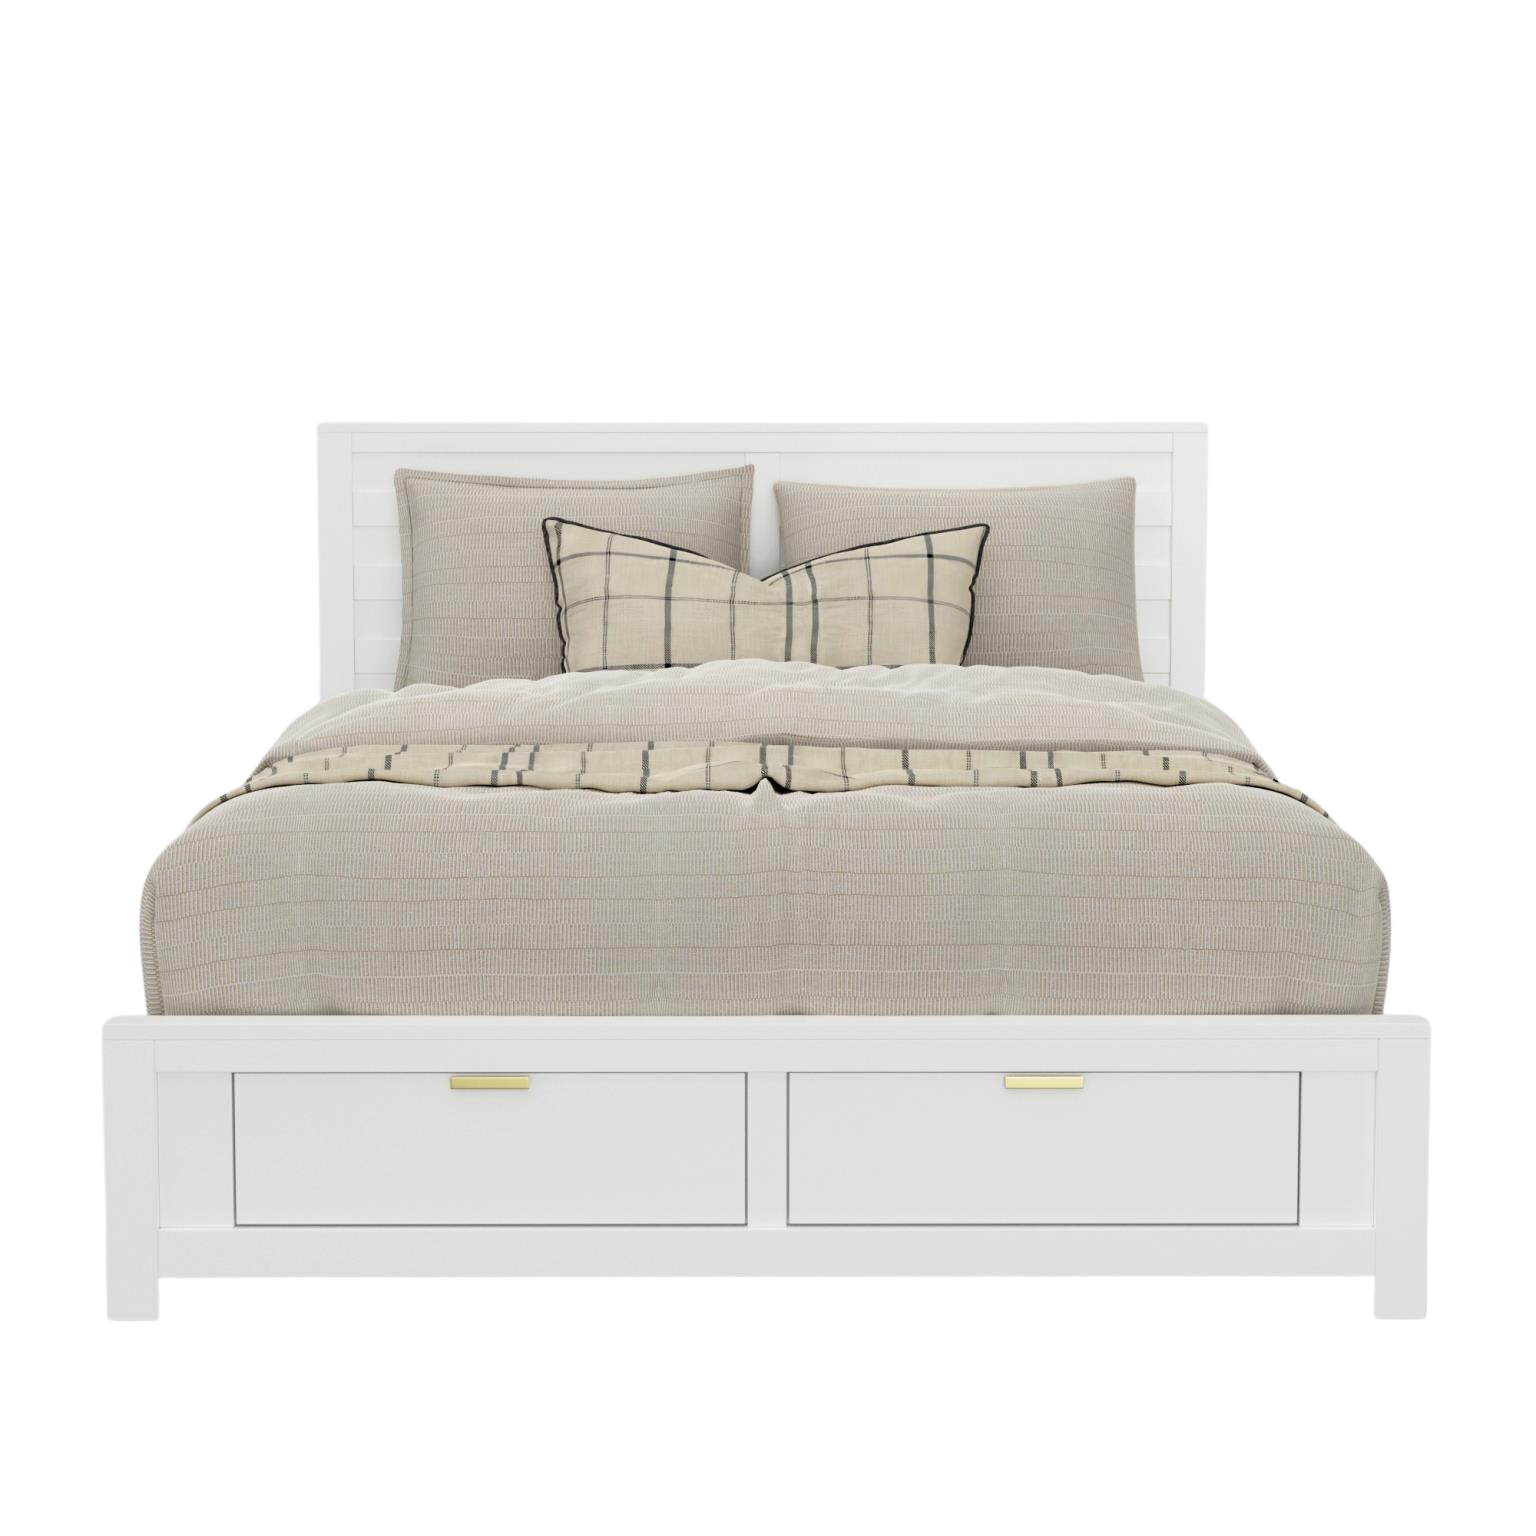 Carmel Collection Storage Bed - White